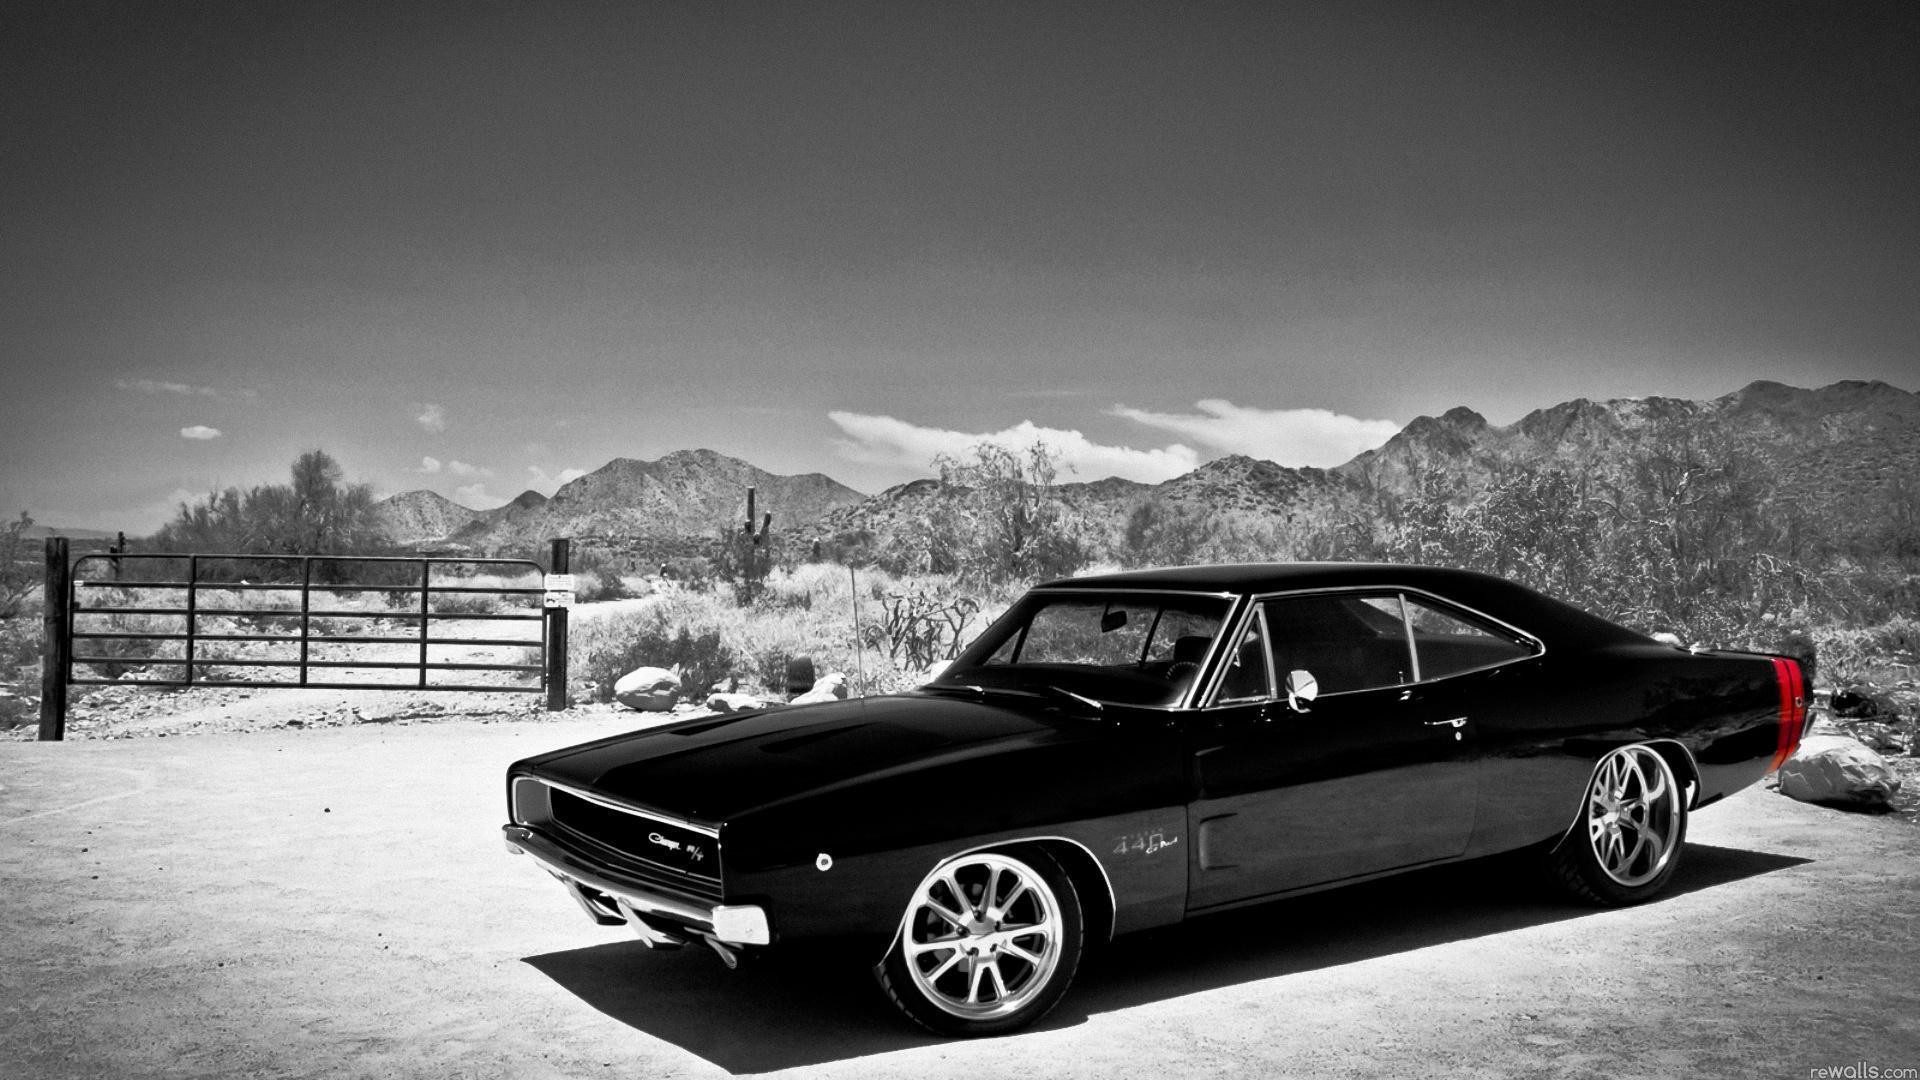 1920x1080 Old Muscle Cars Images 6 HD Wallpapers | aduphoto.